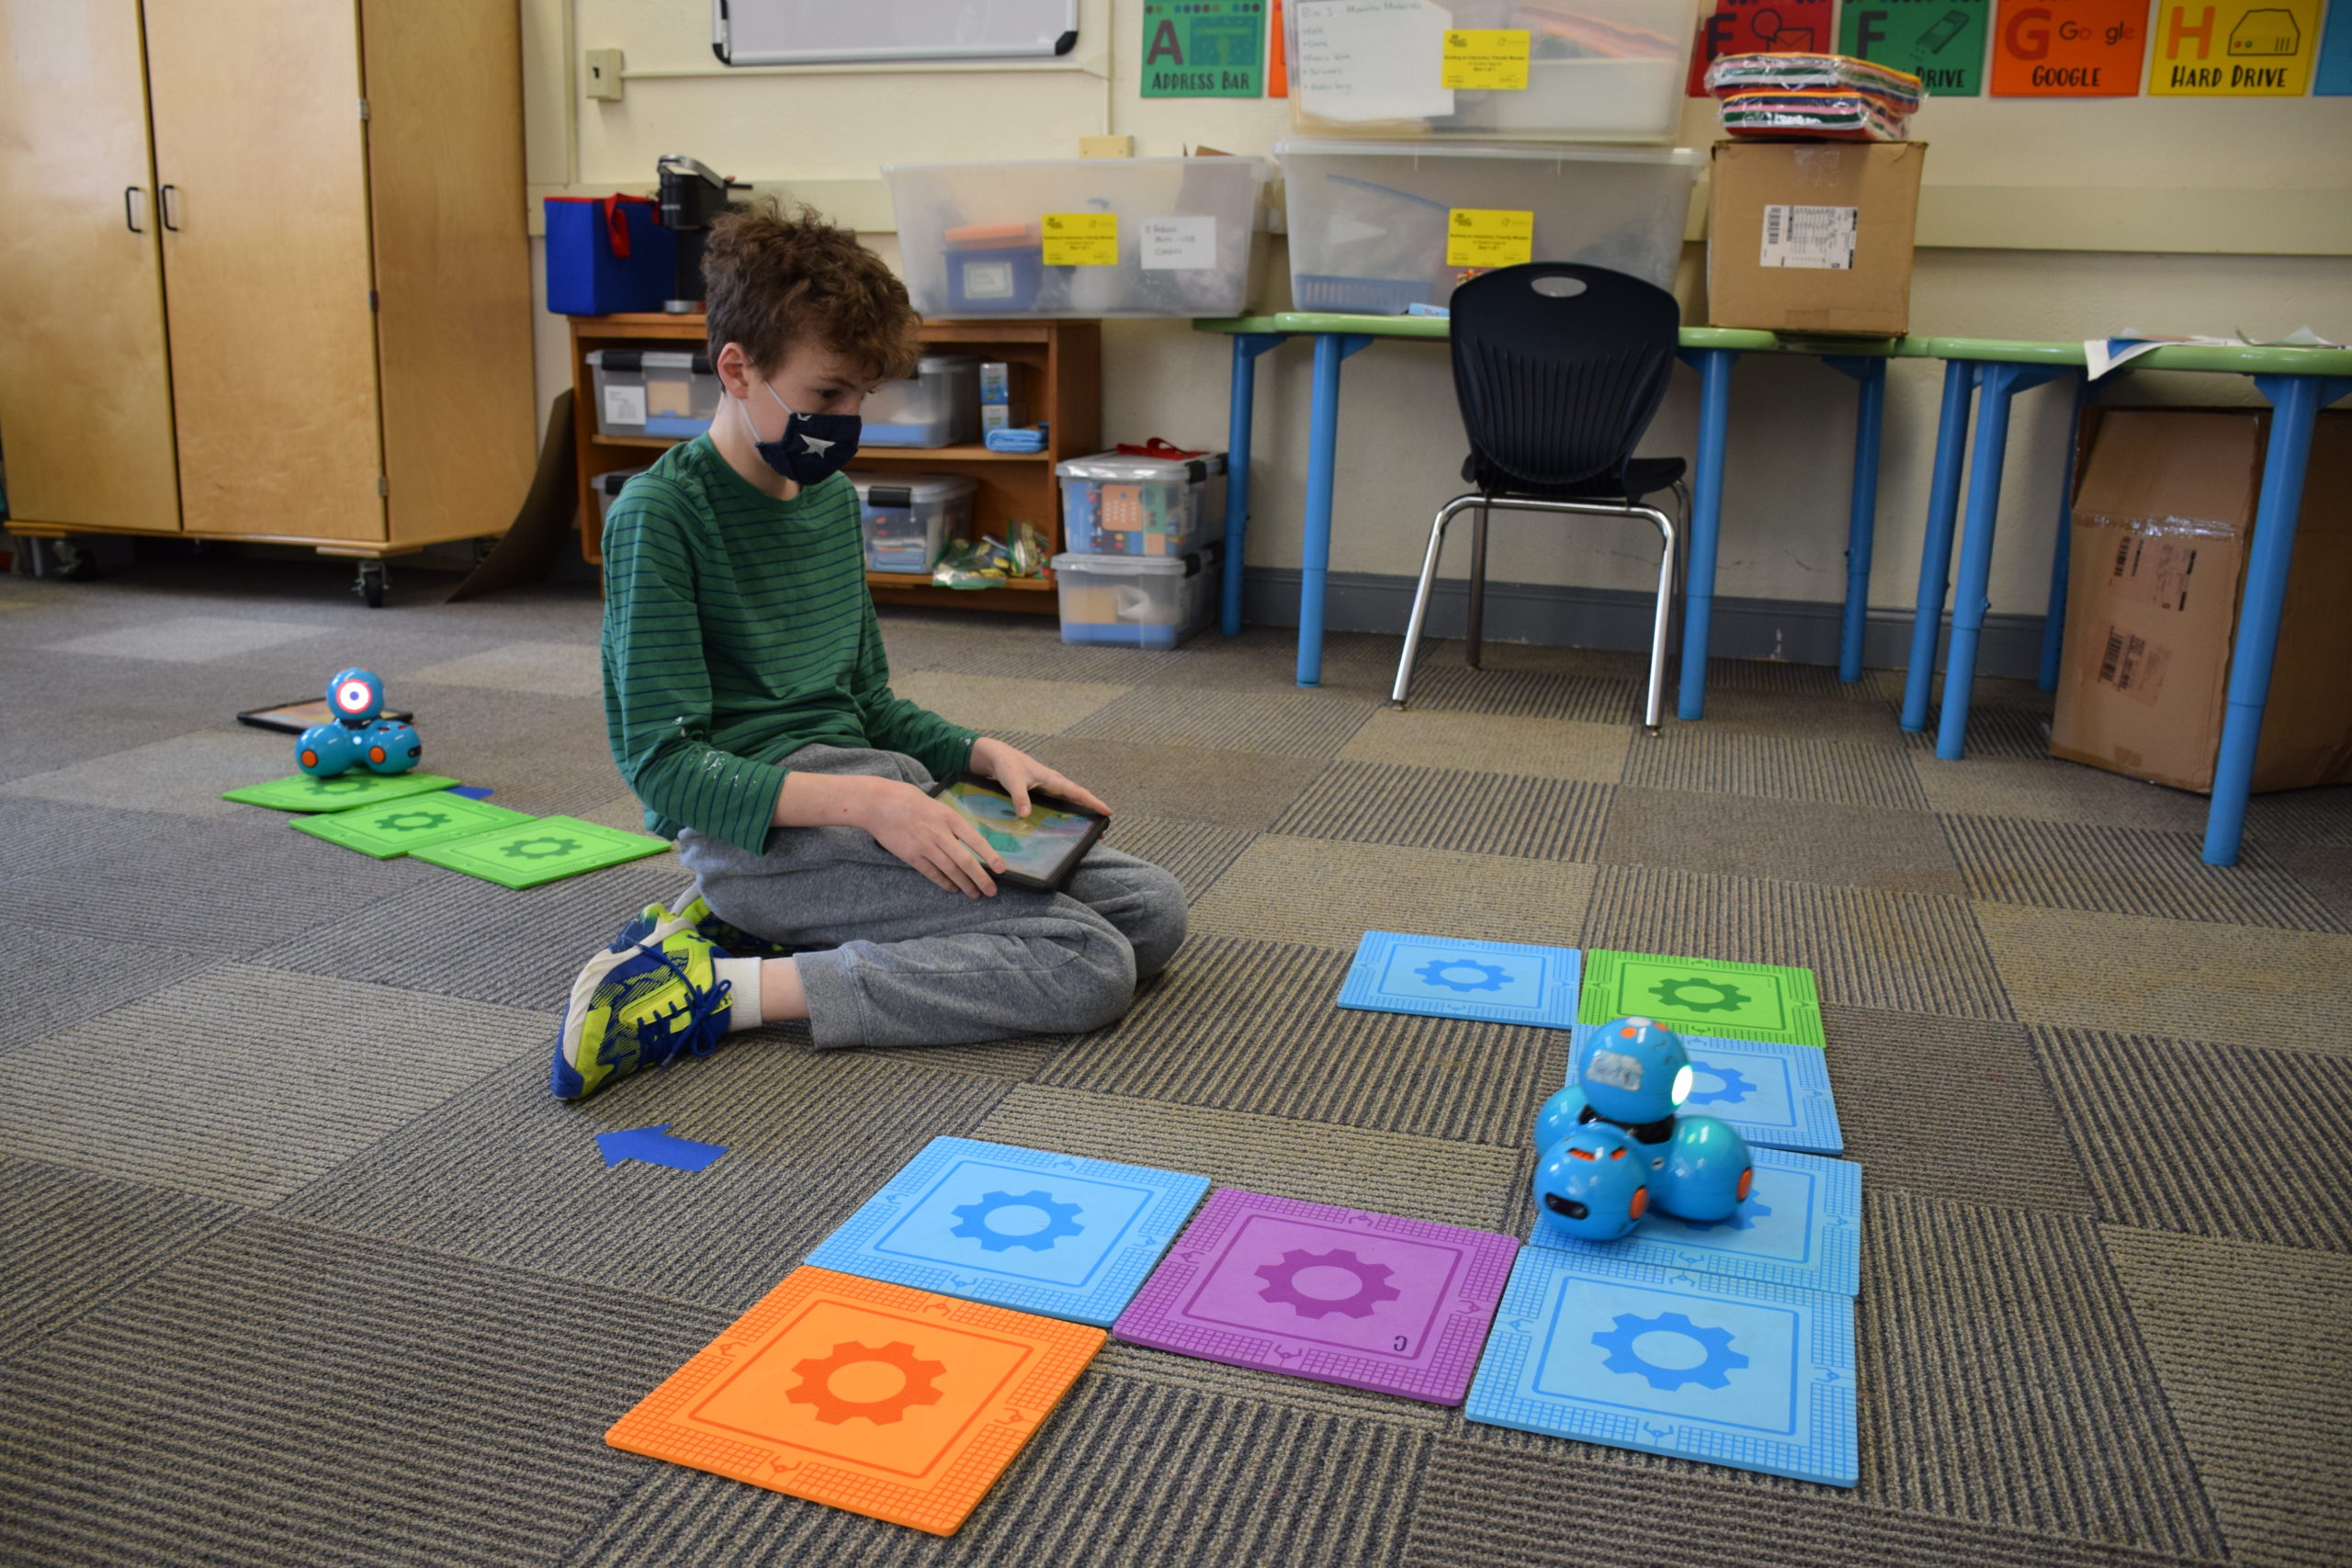 Students Guide Robots Through Mazes Using iPads from Foundation Grant